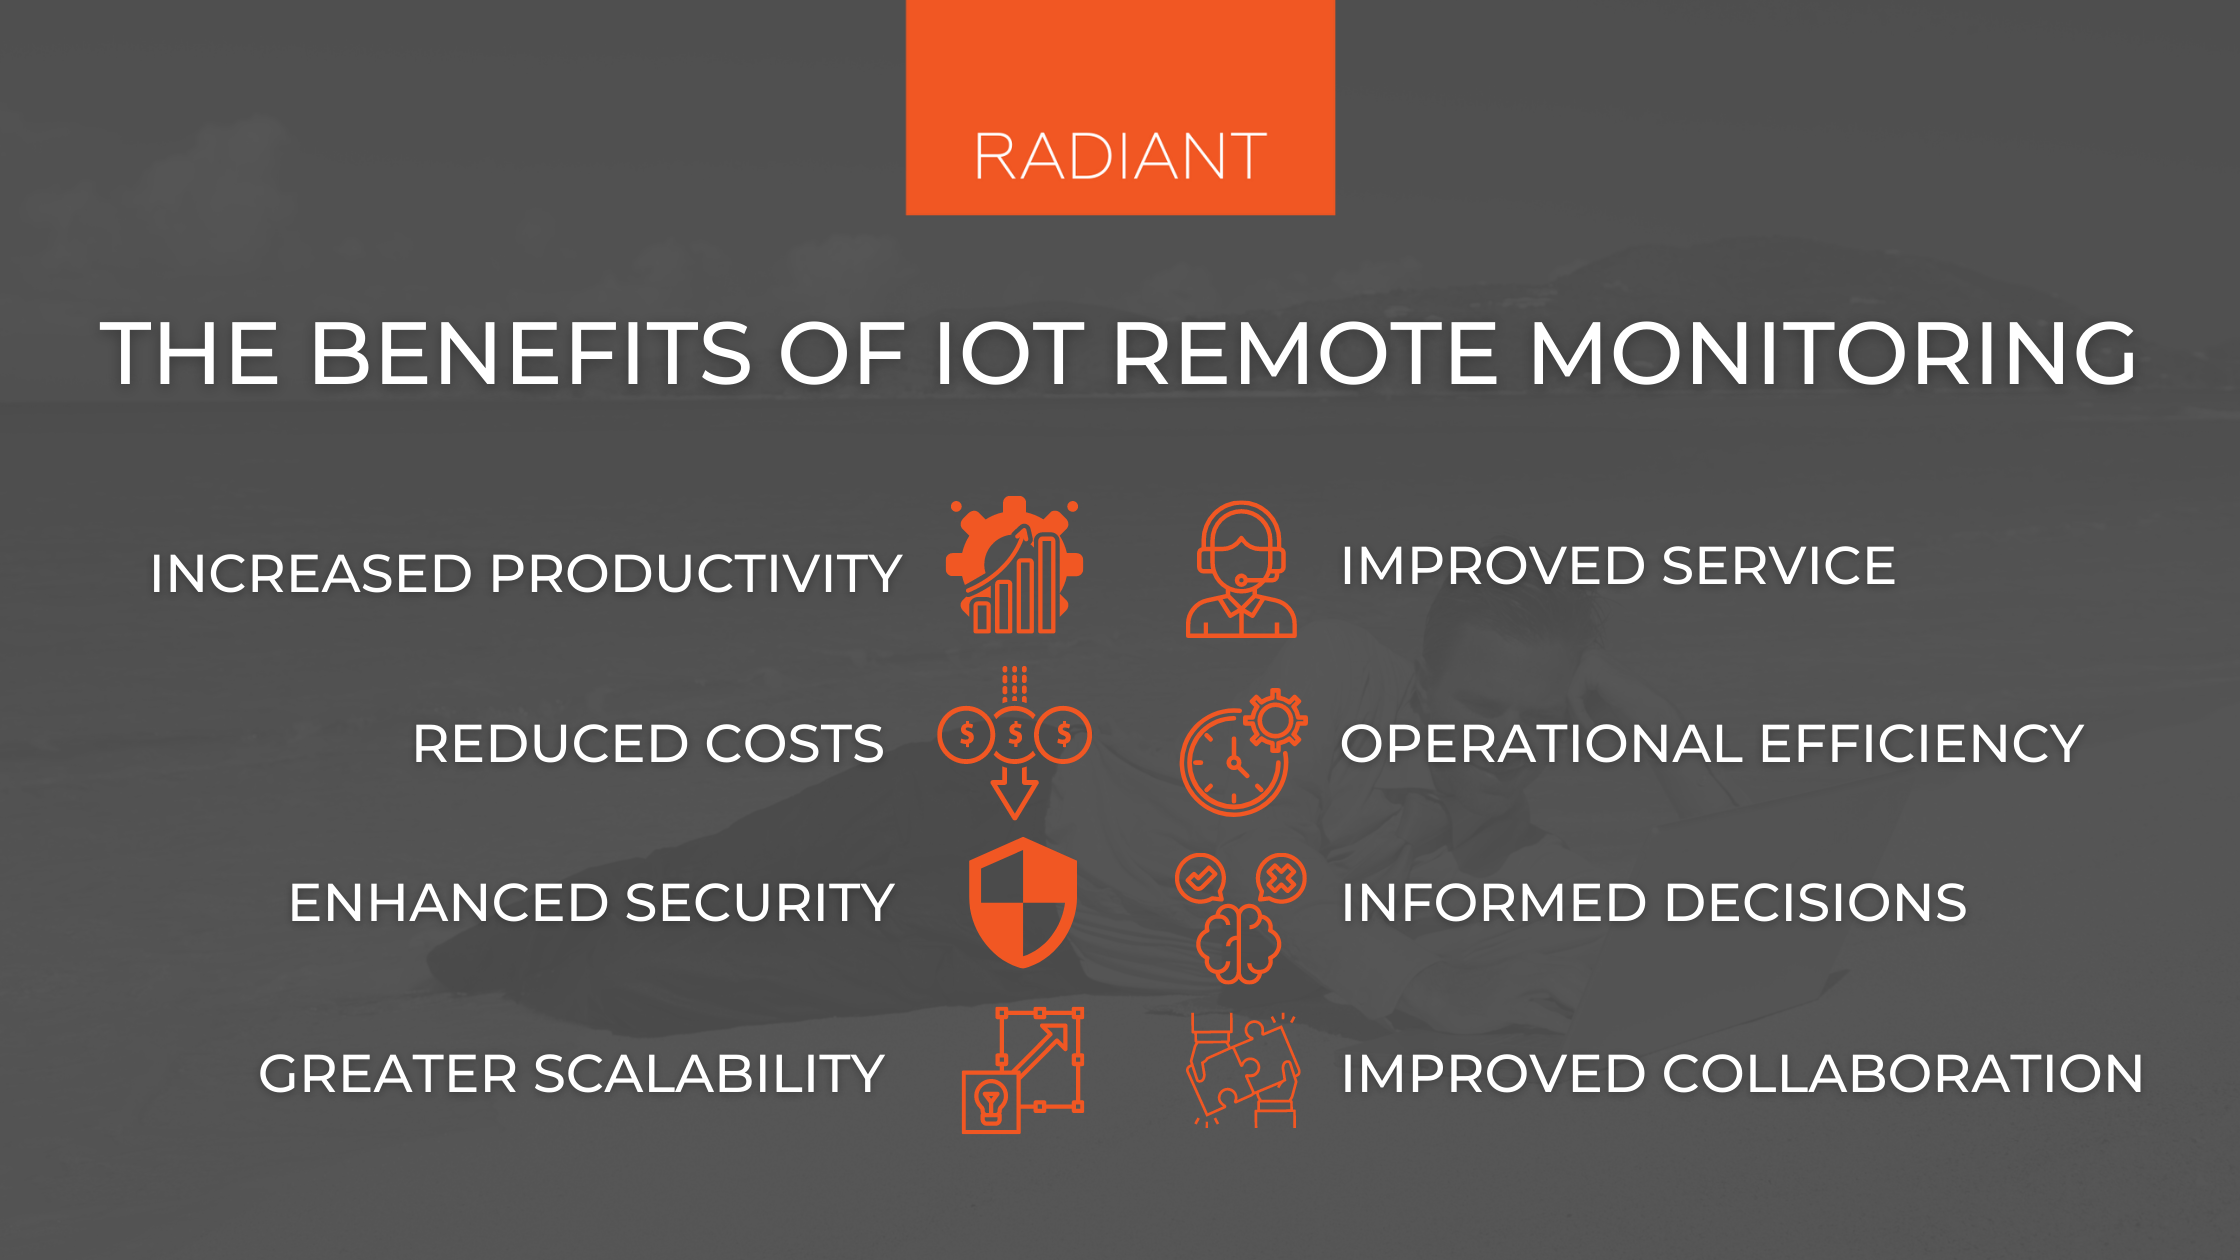 IoT Monitoring Solutions - Remote IoT Data Monitoring - IoT Remote Monitoring Solution - IoT Asset Monitoring - Remote Monitoring IoT - IoT Enabled Remote Monitoring - IoT Remote Asset Monitoring - IoT Remote Asset Monitoring Solution - IoT Remote Monitoring - What Is IoT Remote Monitoring - Remote Monitoring - Remote IoT Monitoring Devices - Remote IoT Monitor Device - Remote Monitor IoT Device